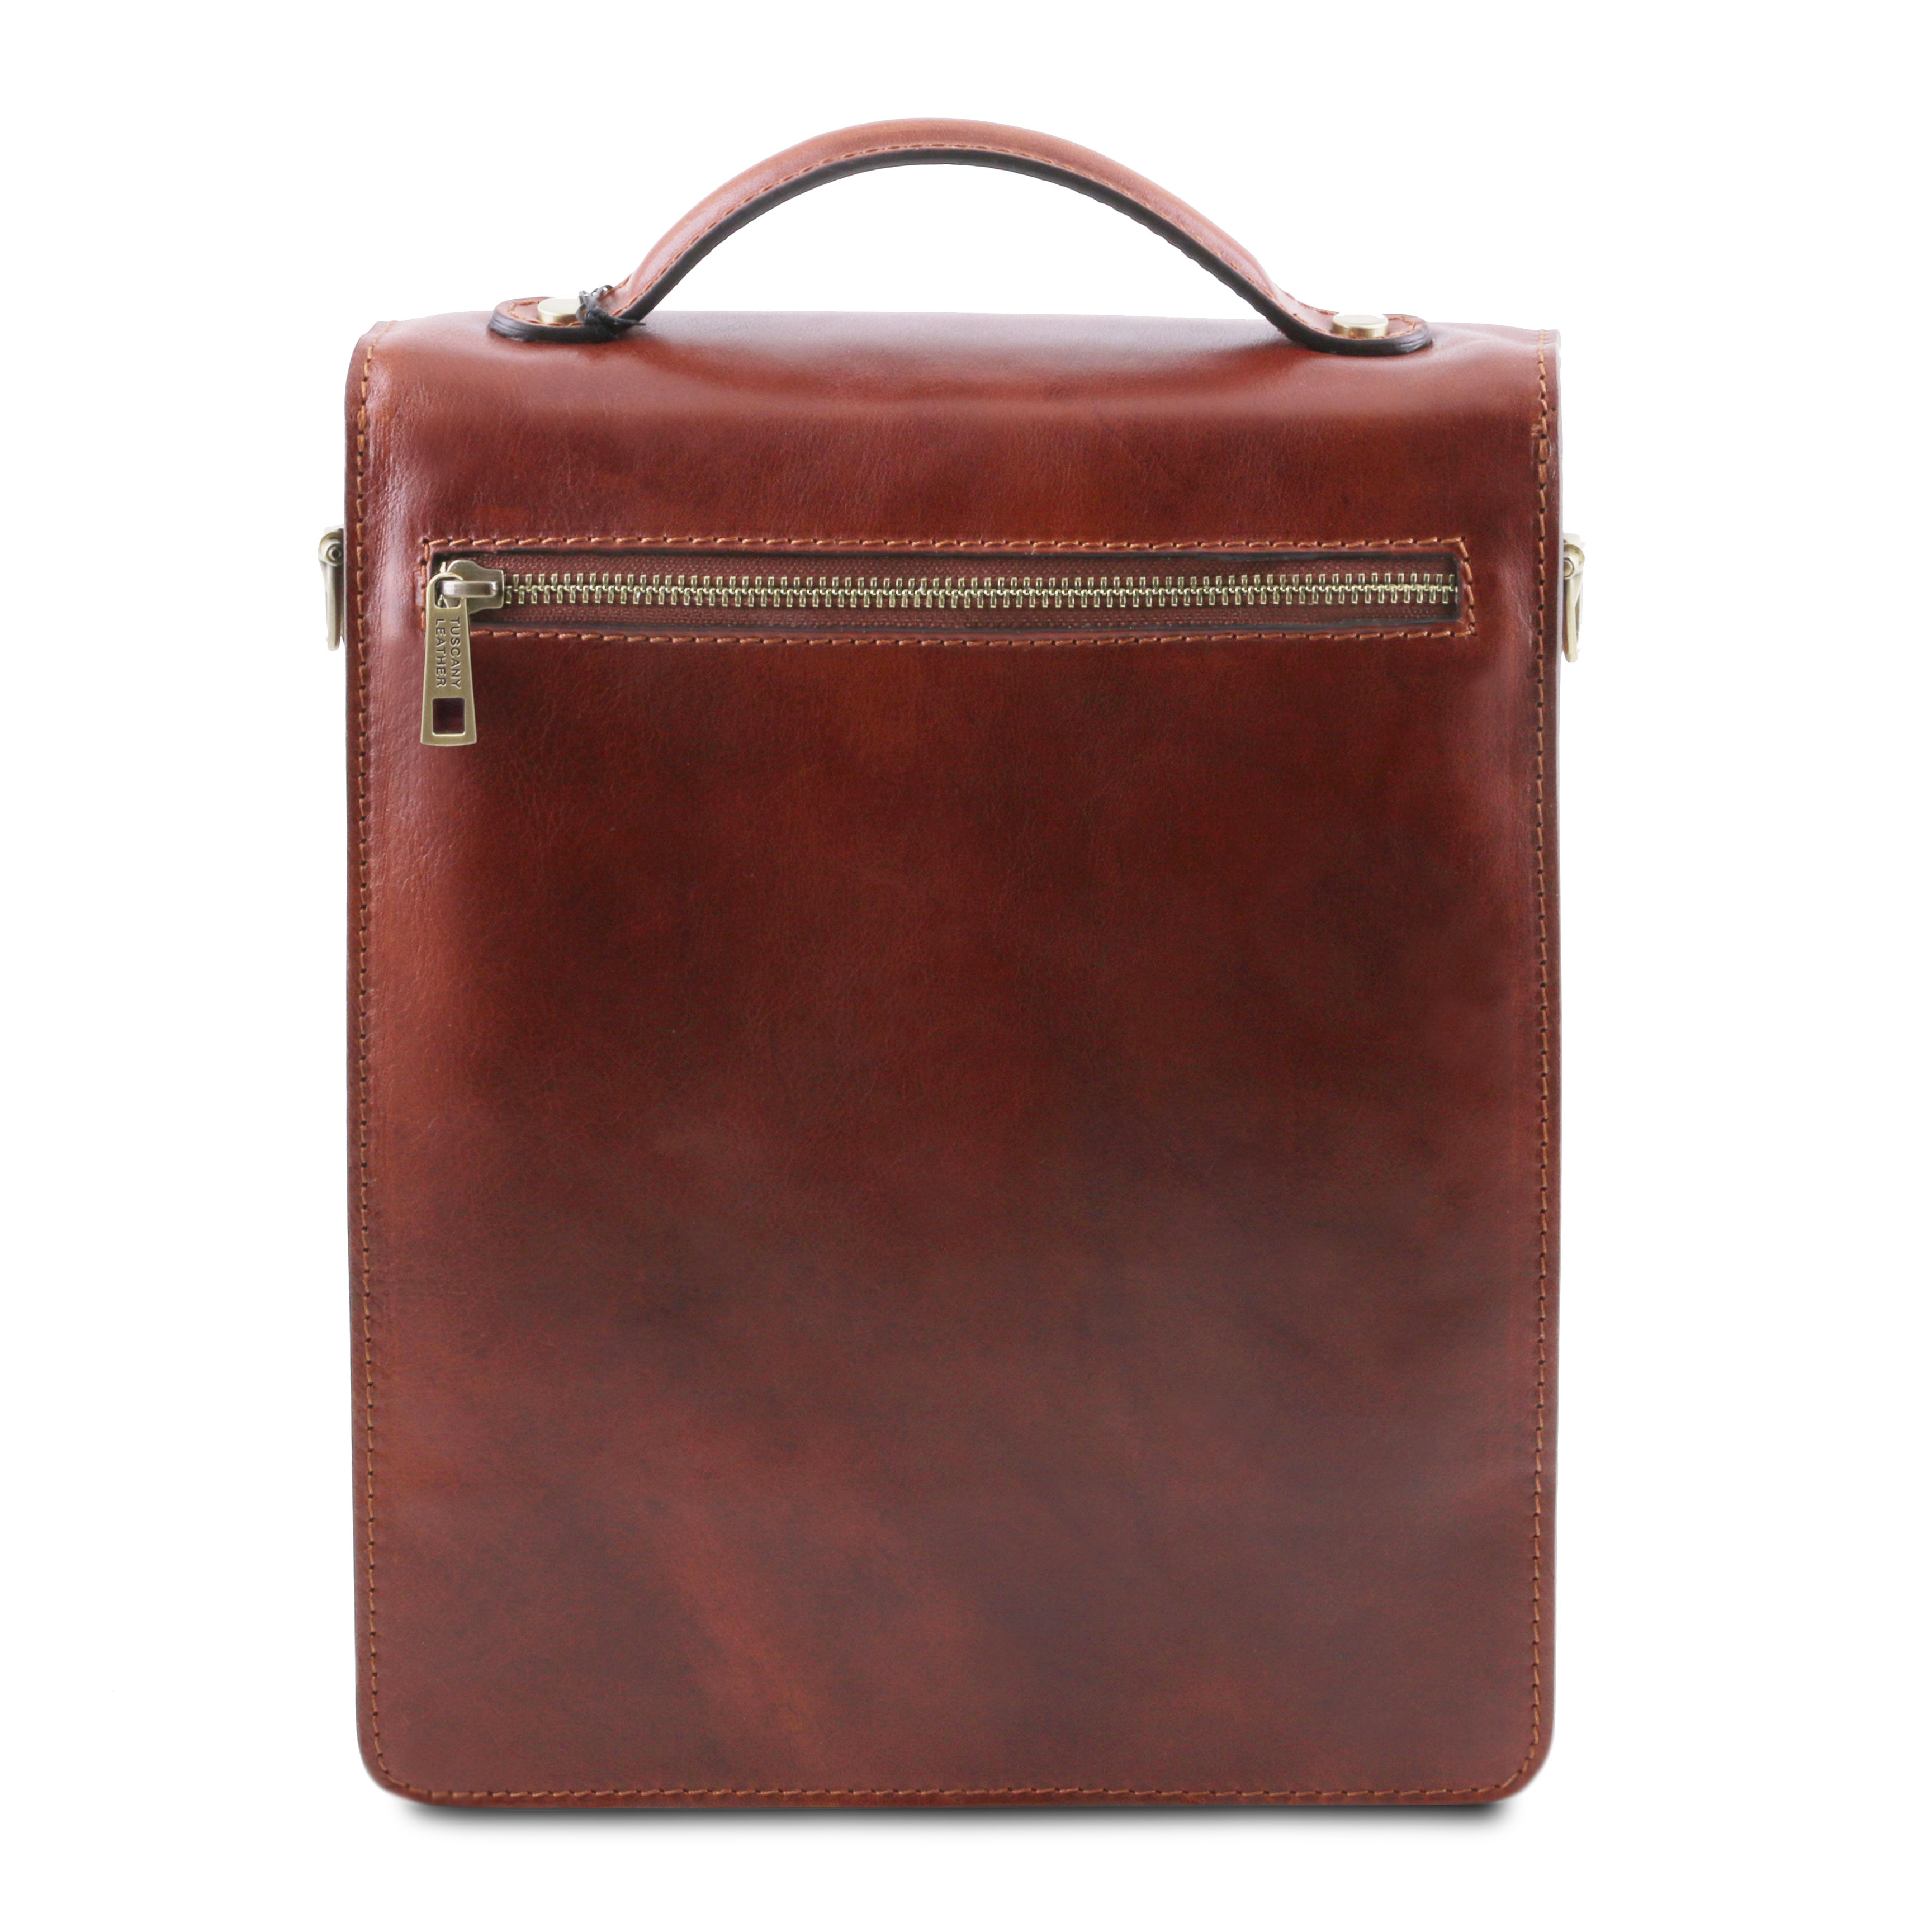 Tuscany Leather David - large size Colour Dark Brown